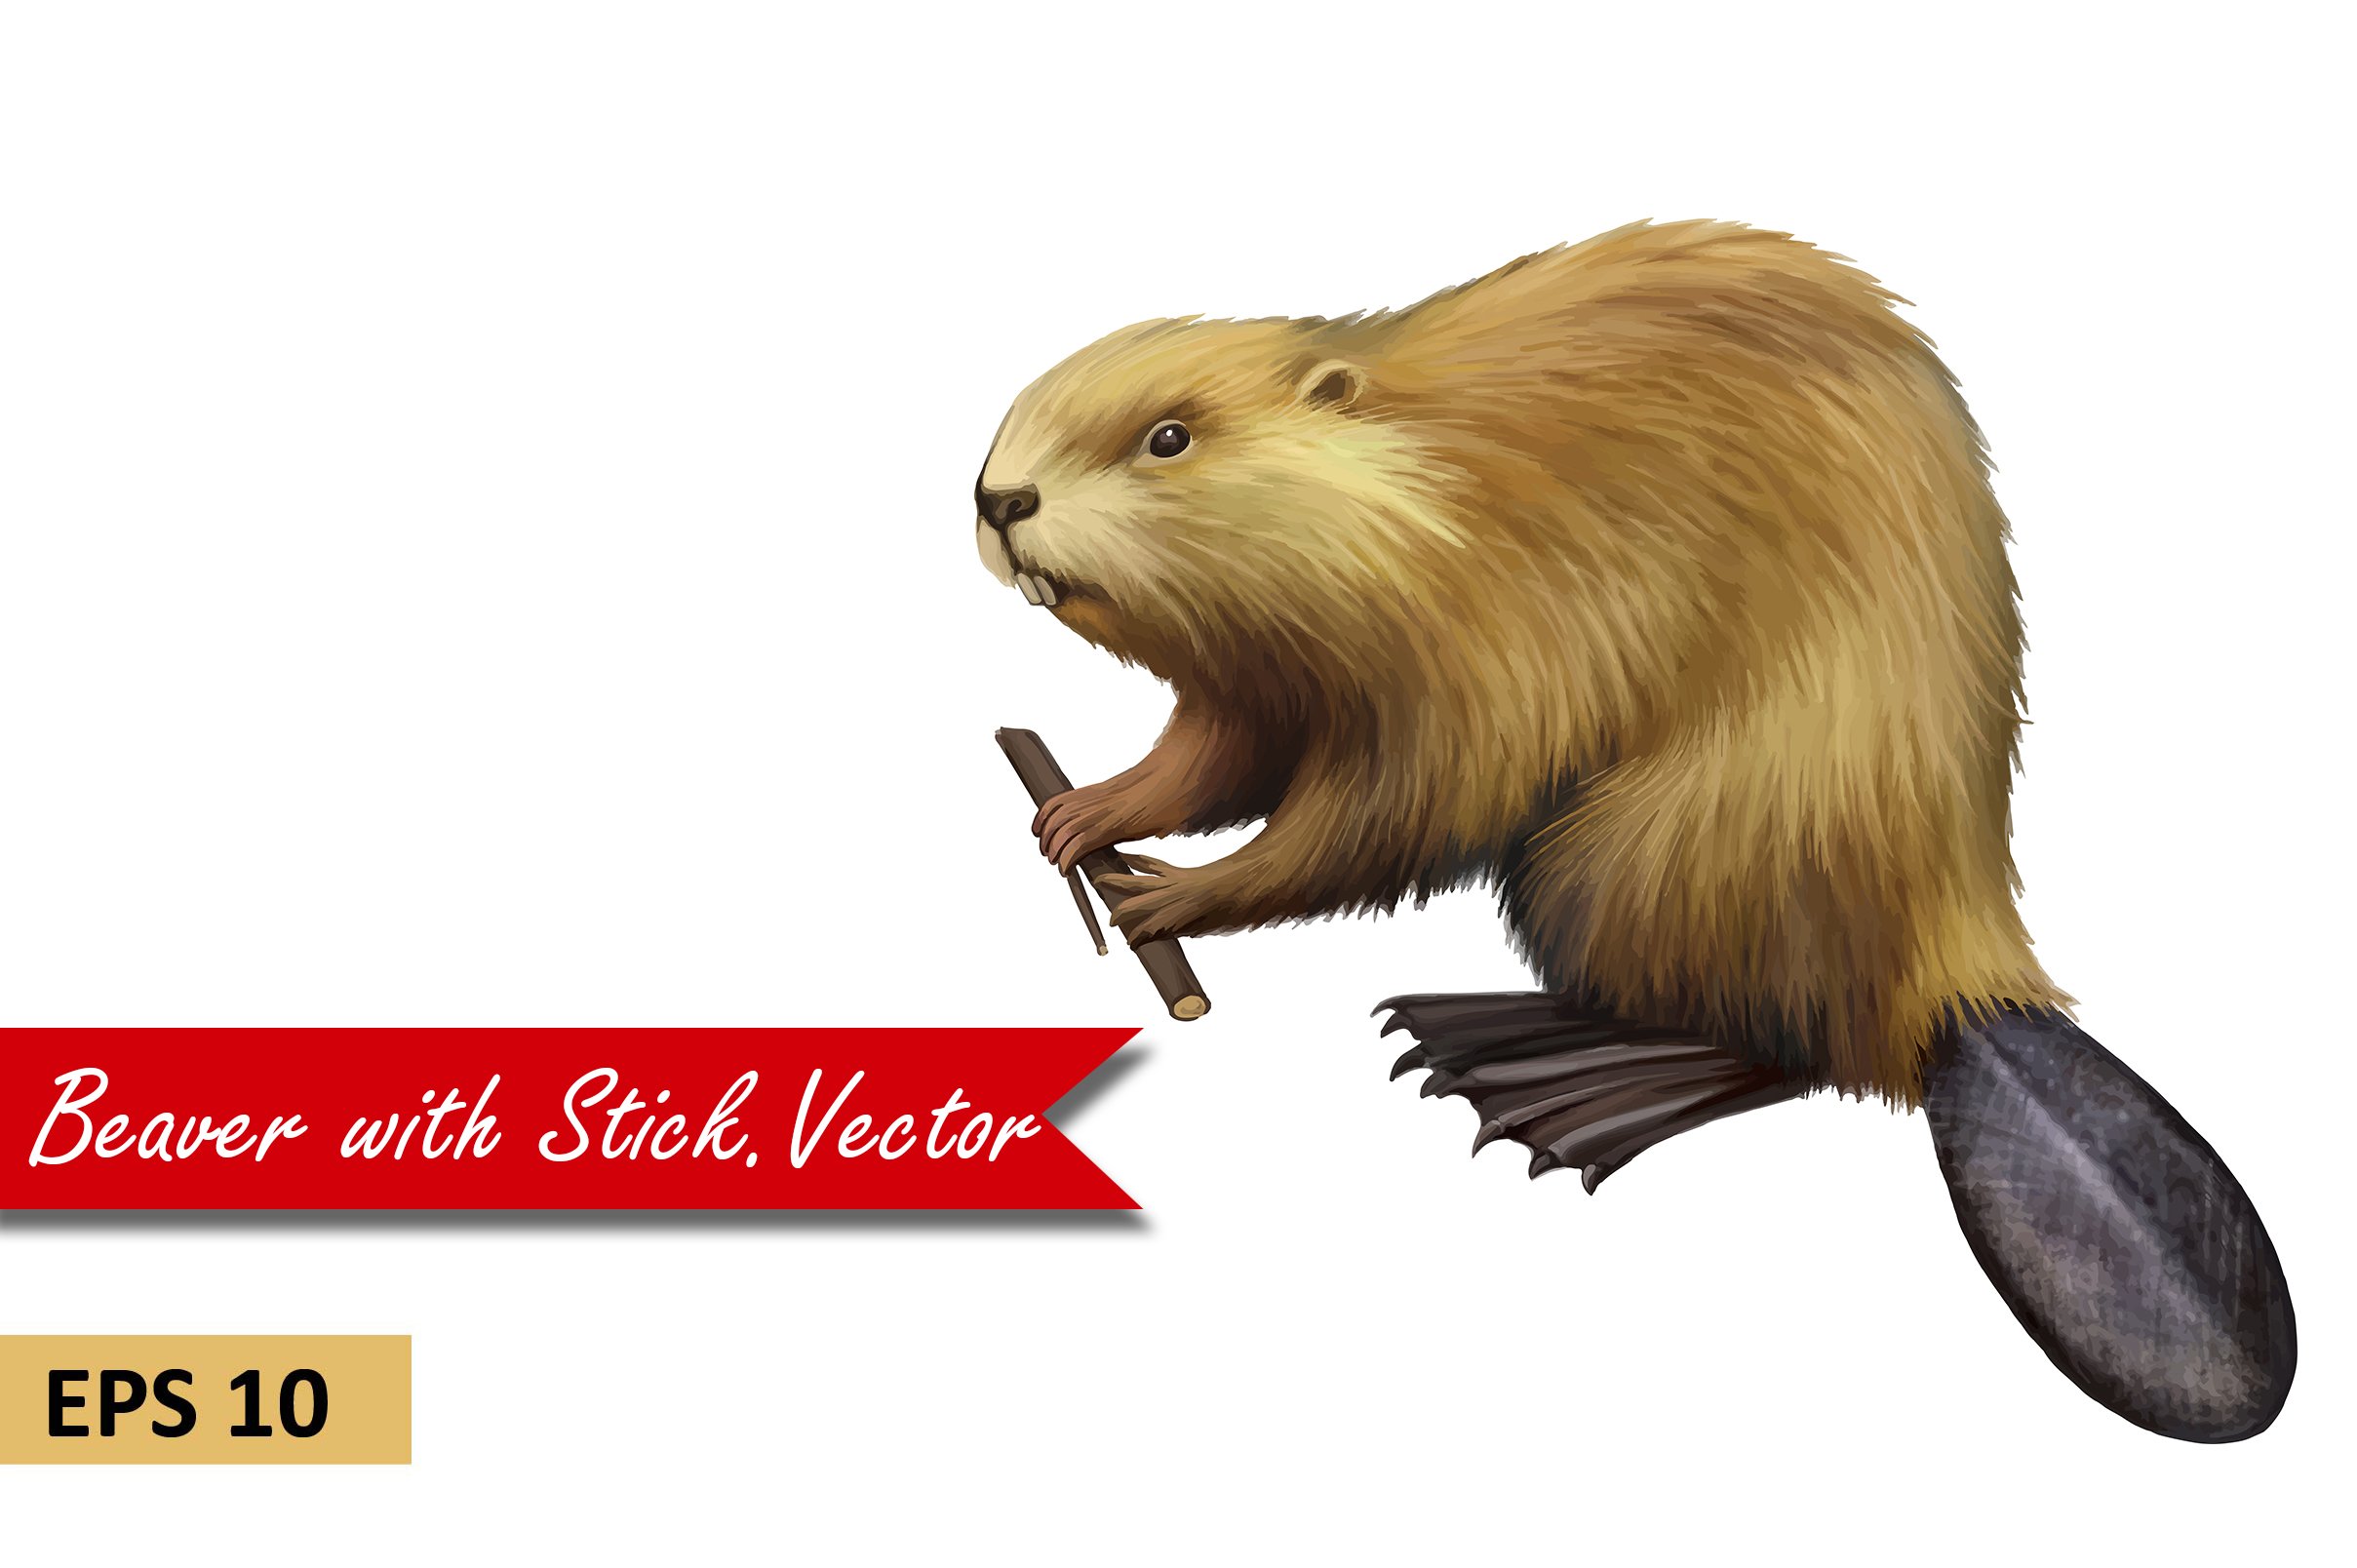 Beaver holding branch. Vector cover image.